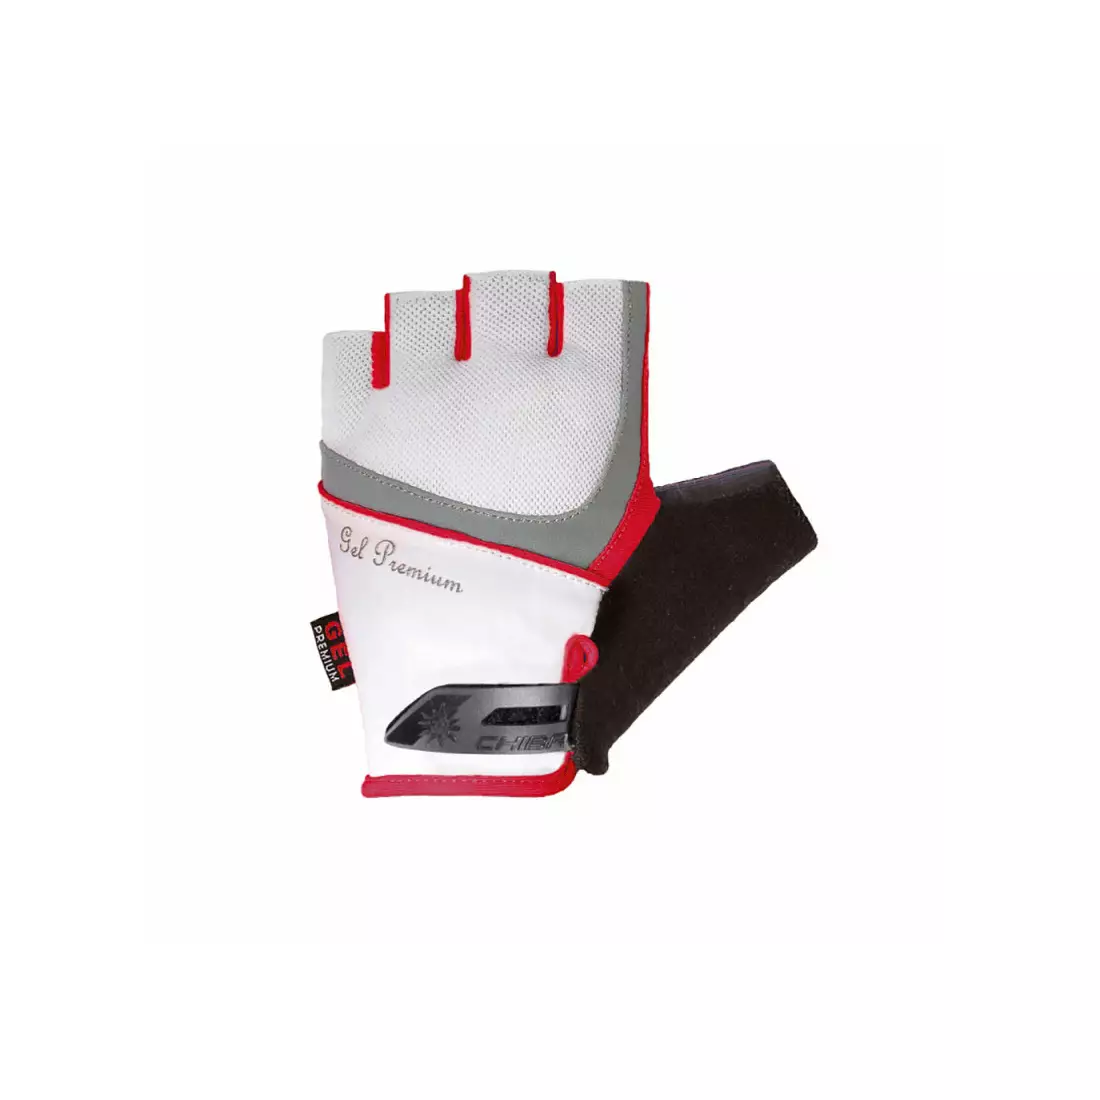 CHIBA LADY GEL women's cycling gloves, white and red